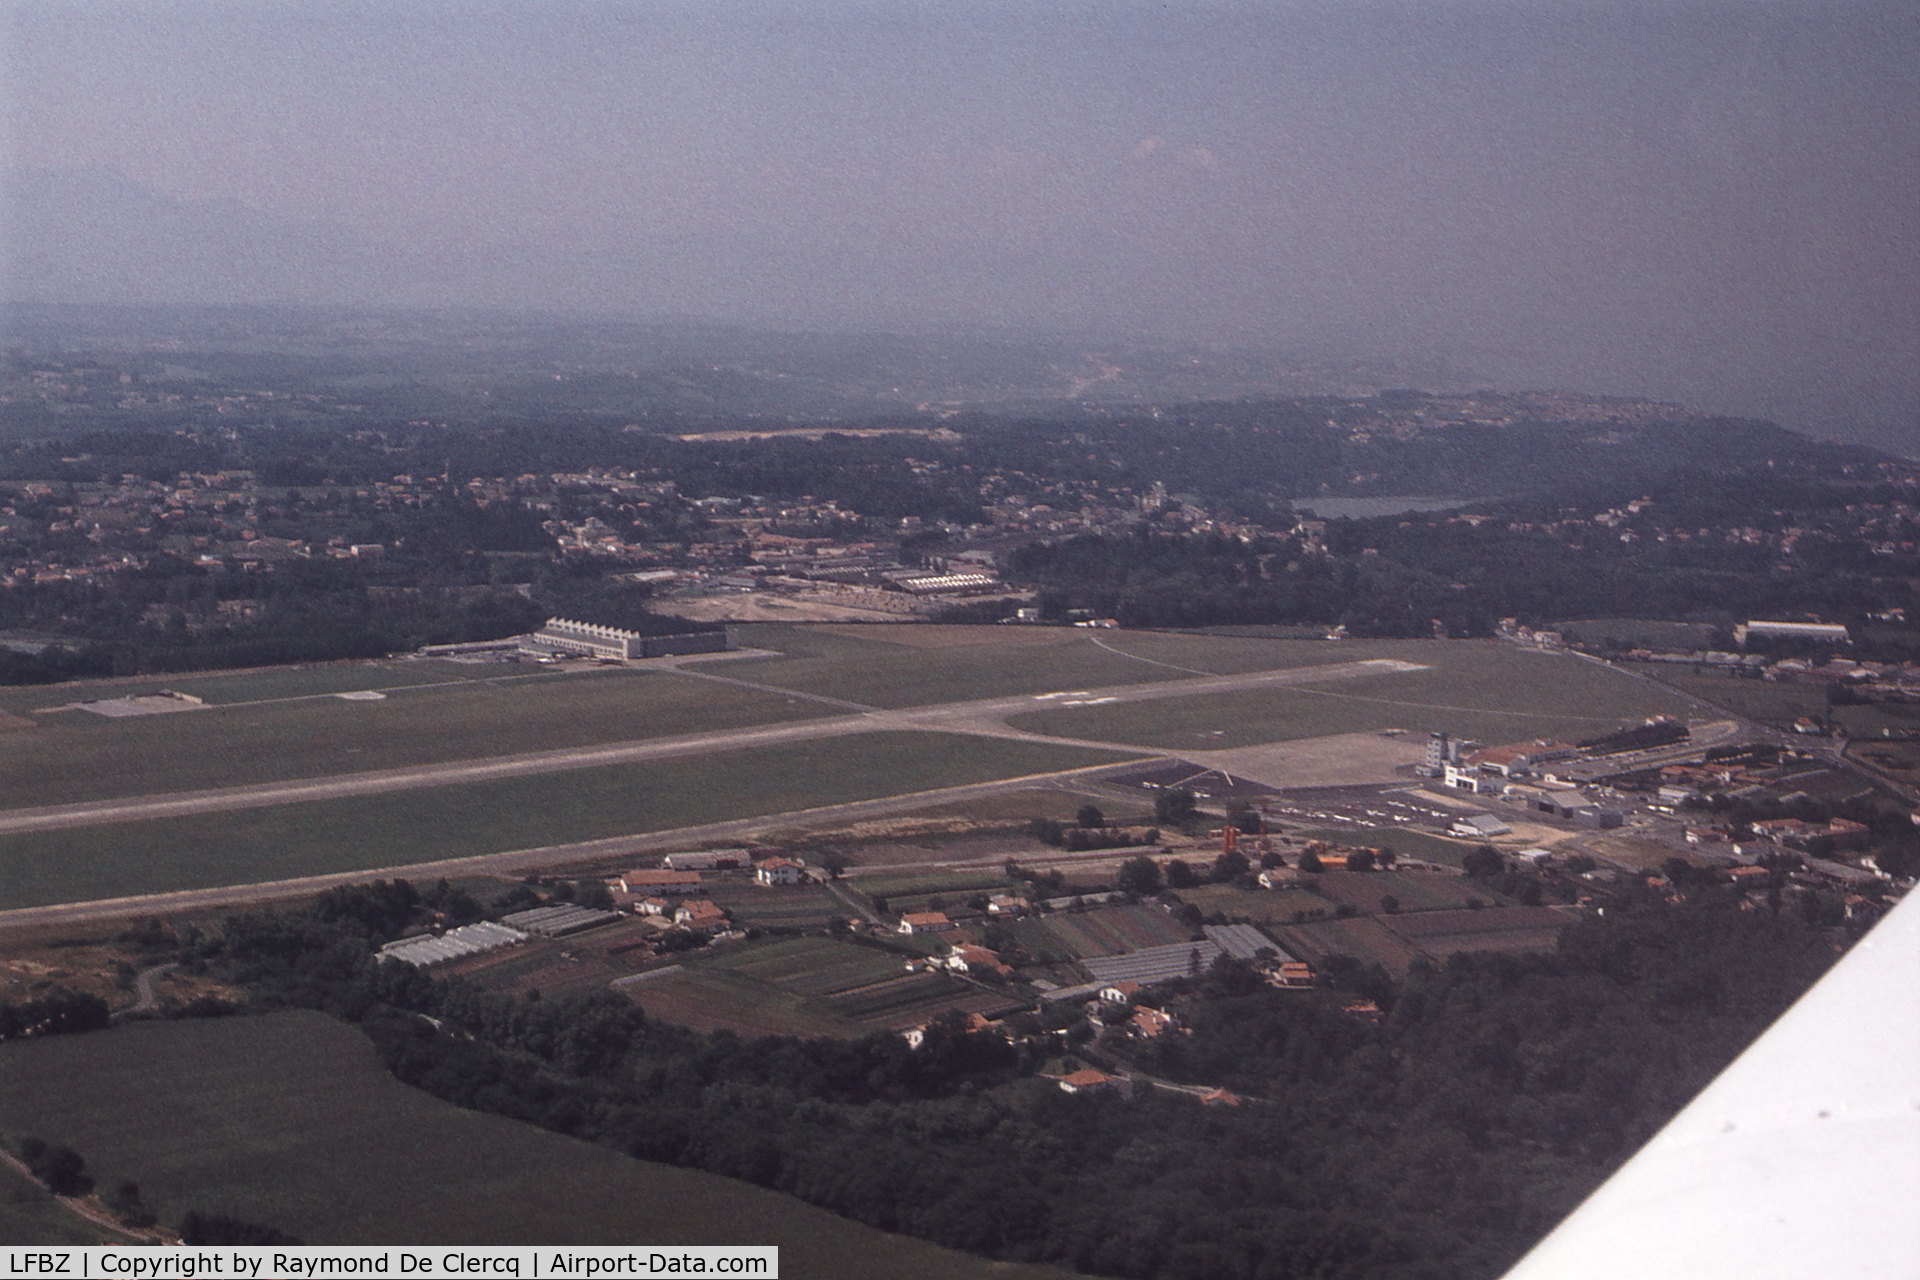 Biarritz-Bayonne Airport, Anglet Airport France (LFBZ) - Coming from the north with OO-TVO in July 1976.